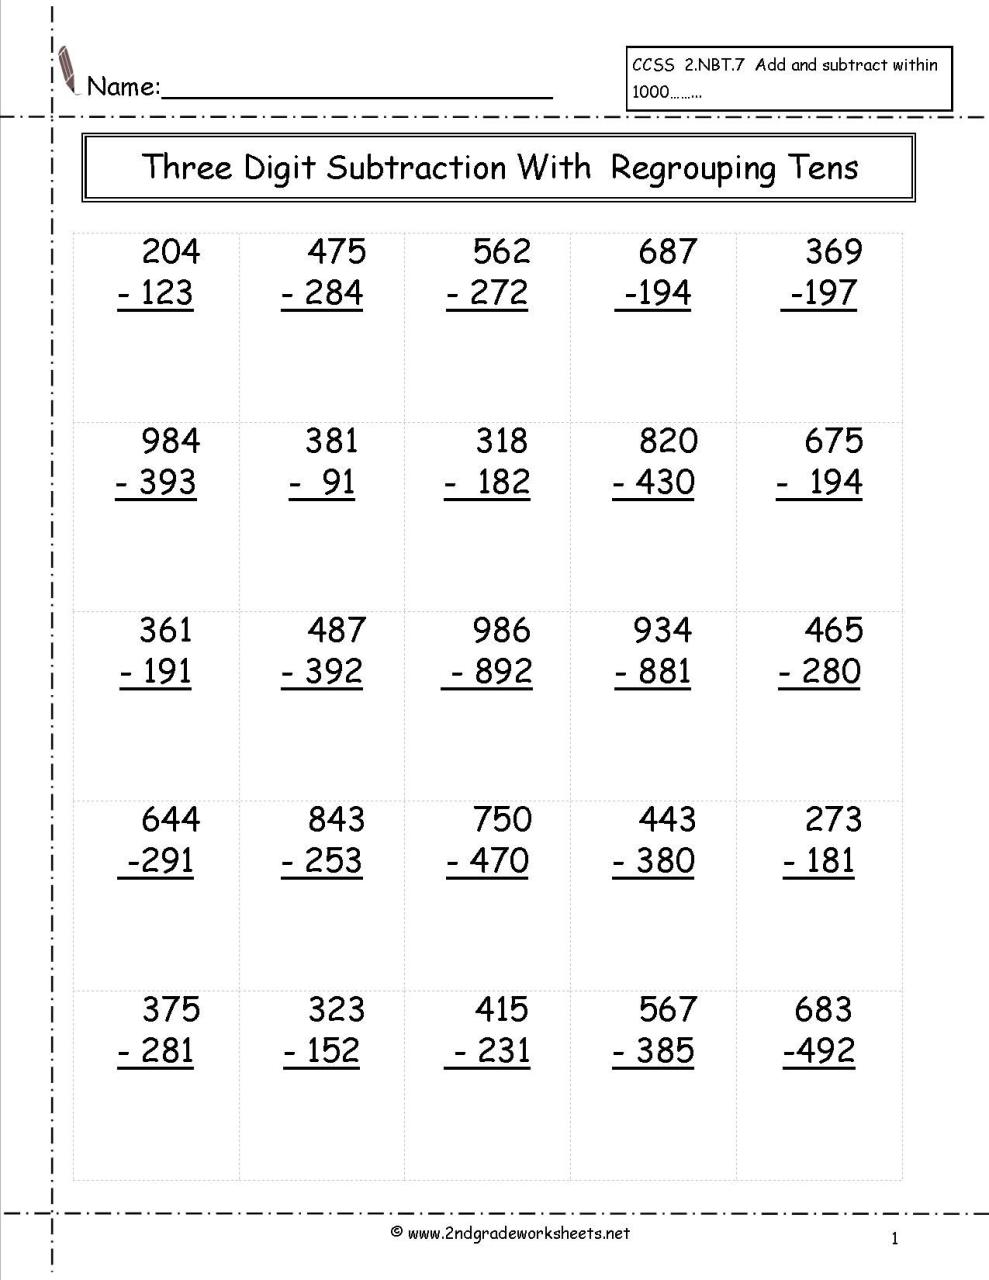 2 Digit Subtraction With Regrouping Worksheets 2Nd Grade Free